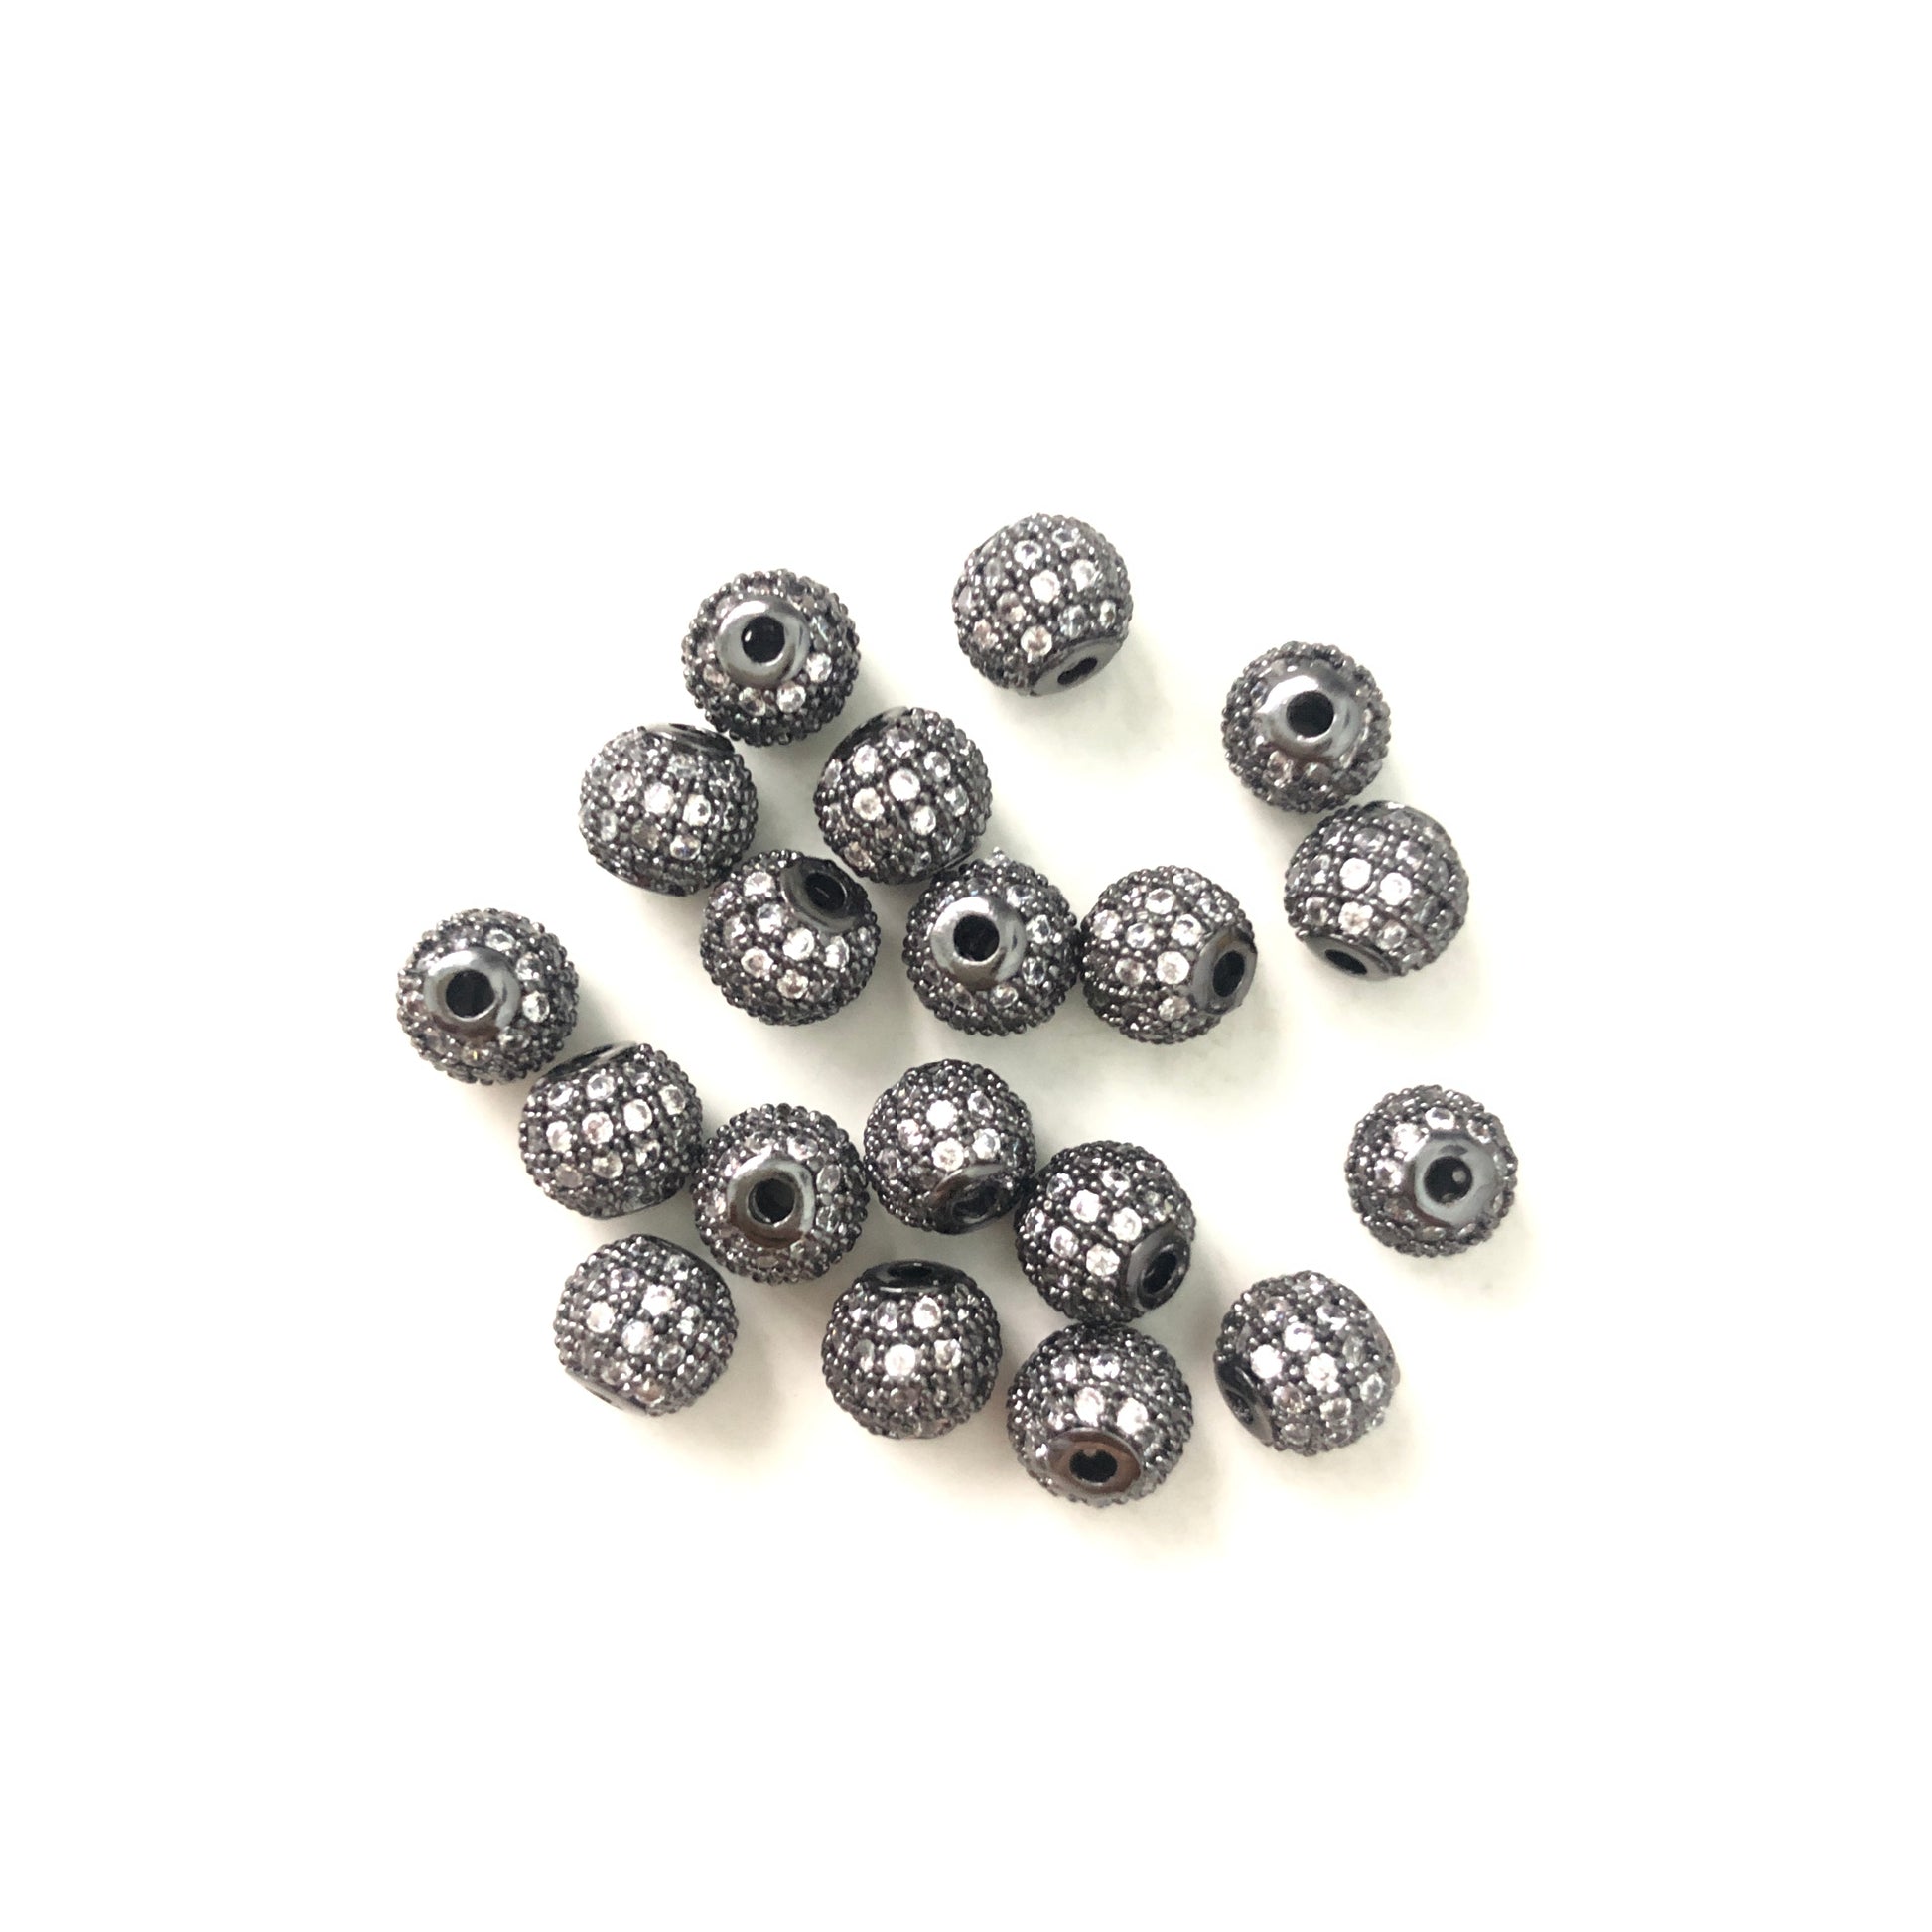 20pcs/lot 6mm Clear CZ Paved Ball Spacers Black CZ Paved Spacers 6mm Beads Ball Beads Charms Beads Beyond